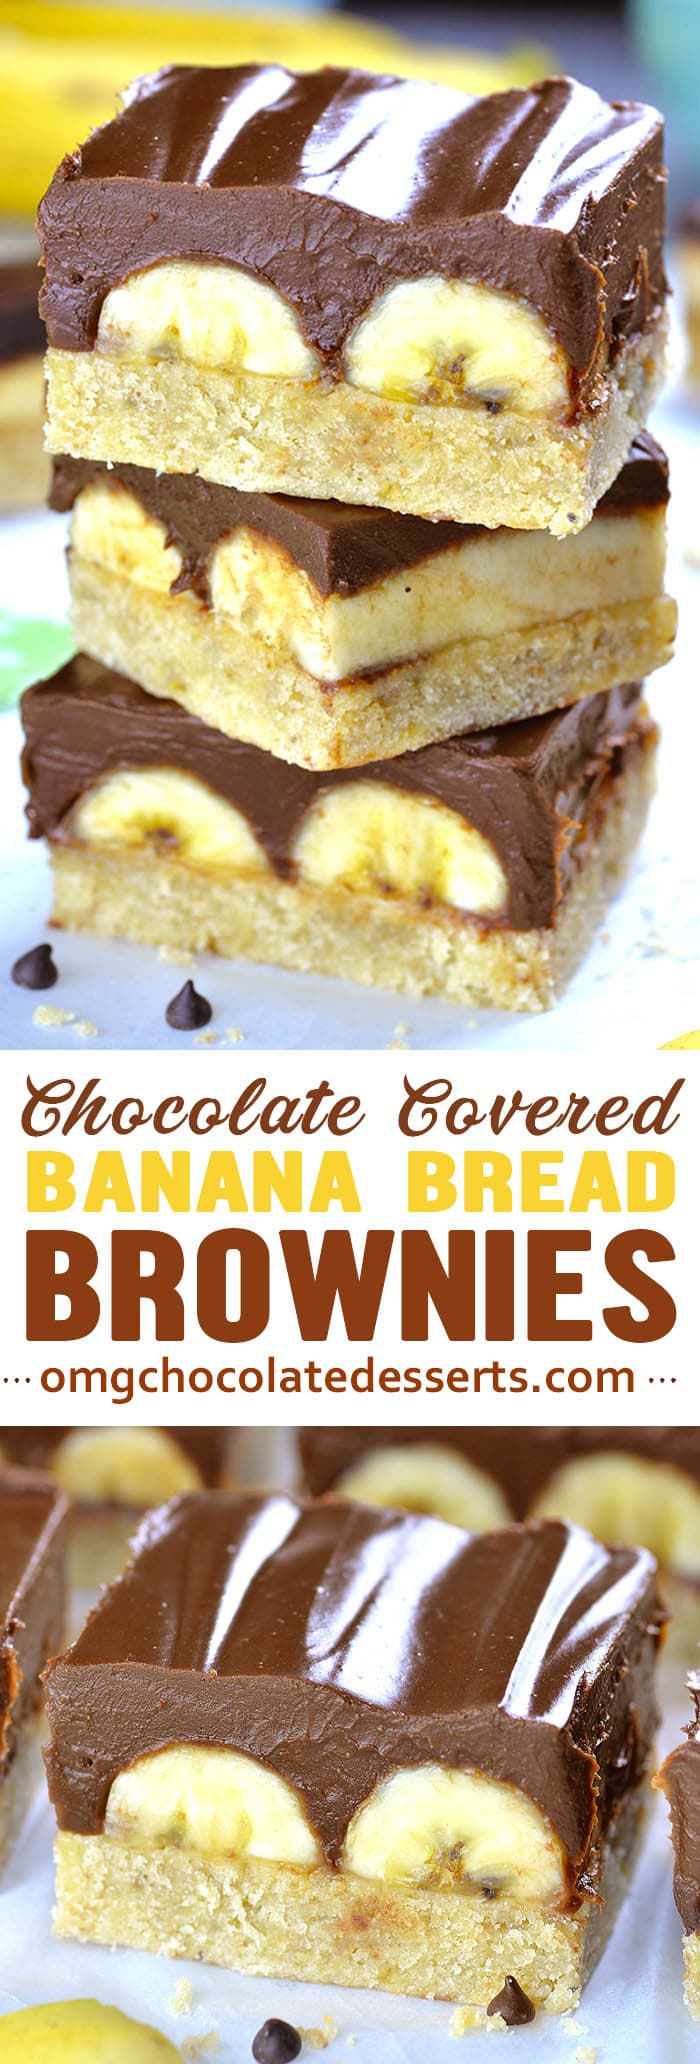 Chocolate Covered Banana Brownies is the most decadent version of chocolate covered bananas you’ll ever tried!!! They are super fudgy and SOOO rich!